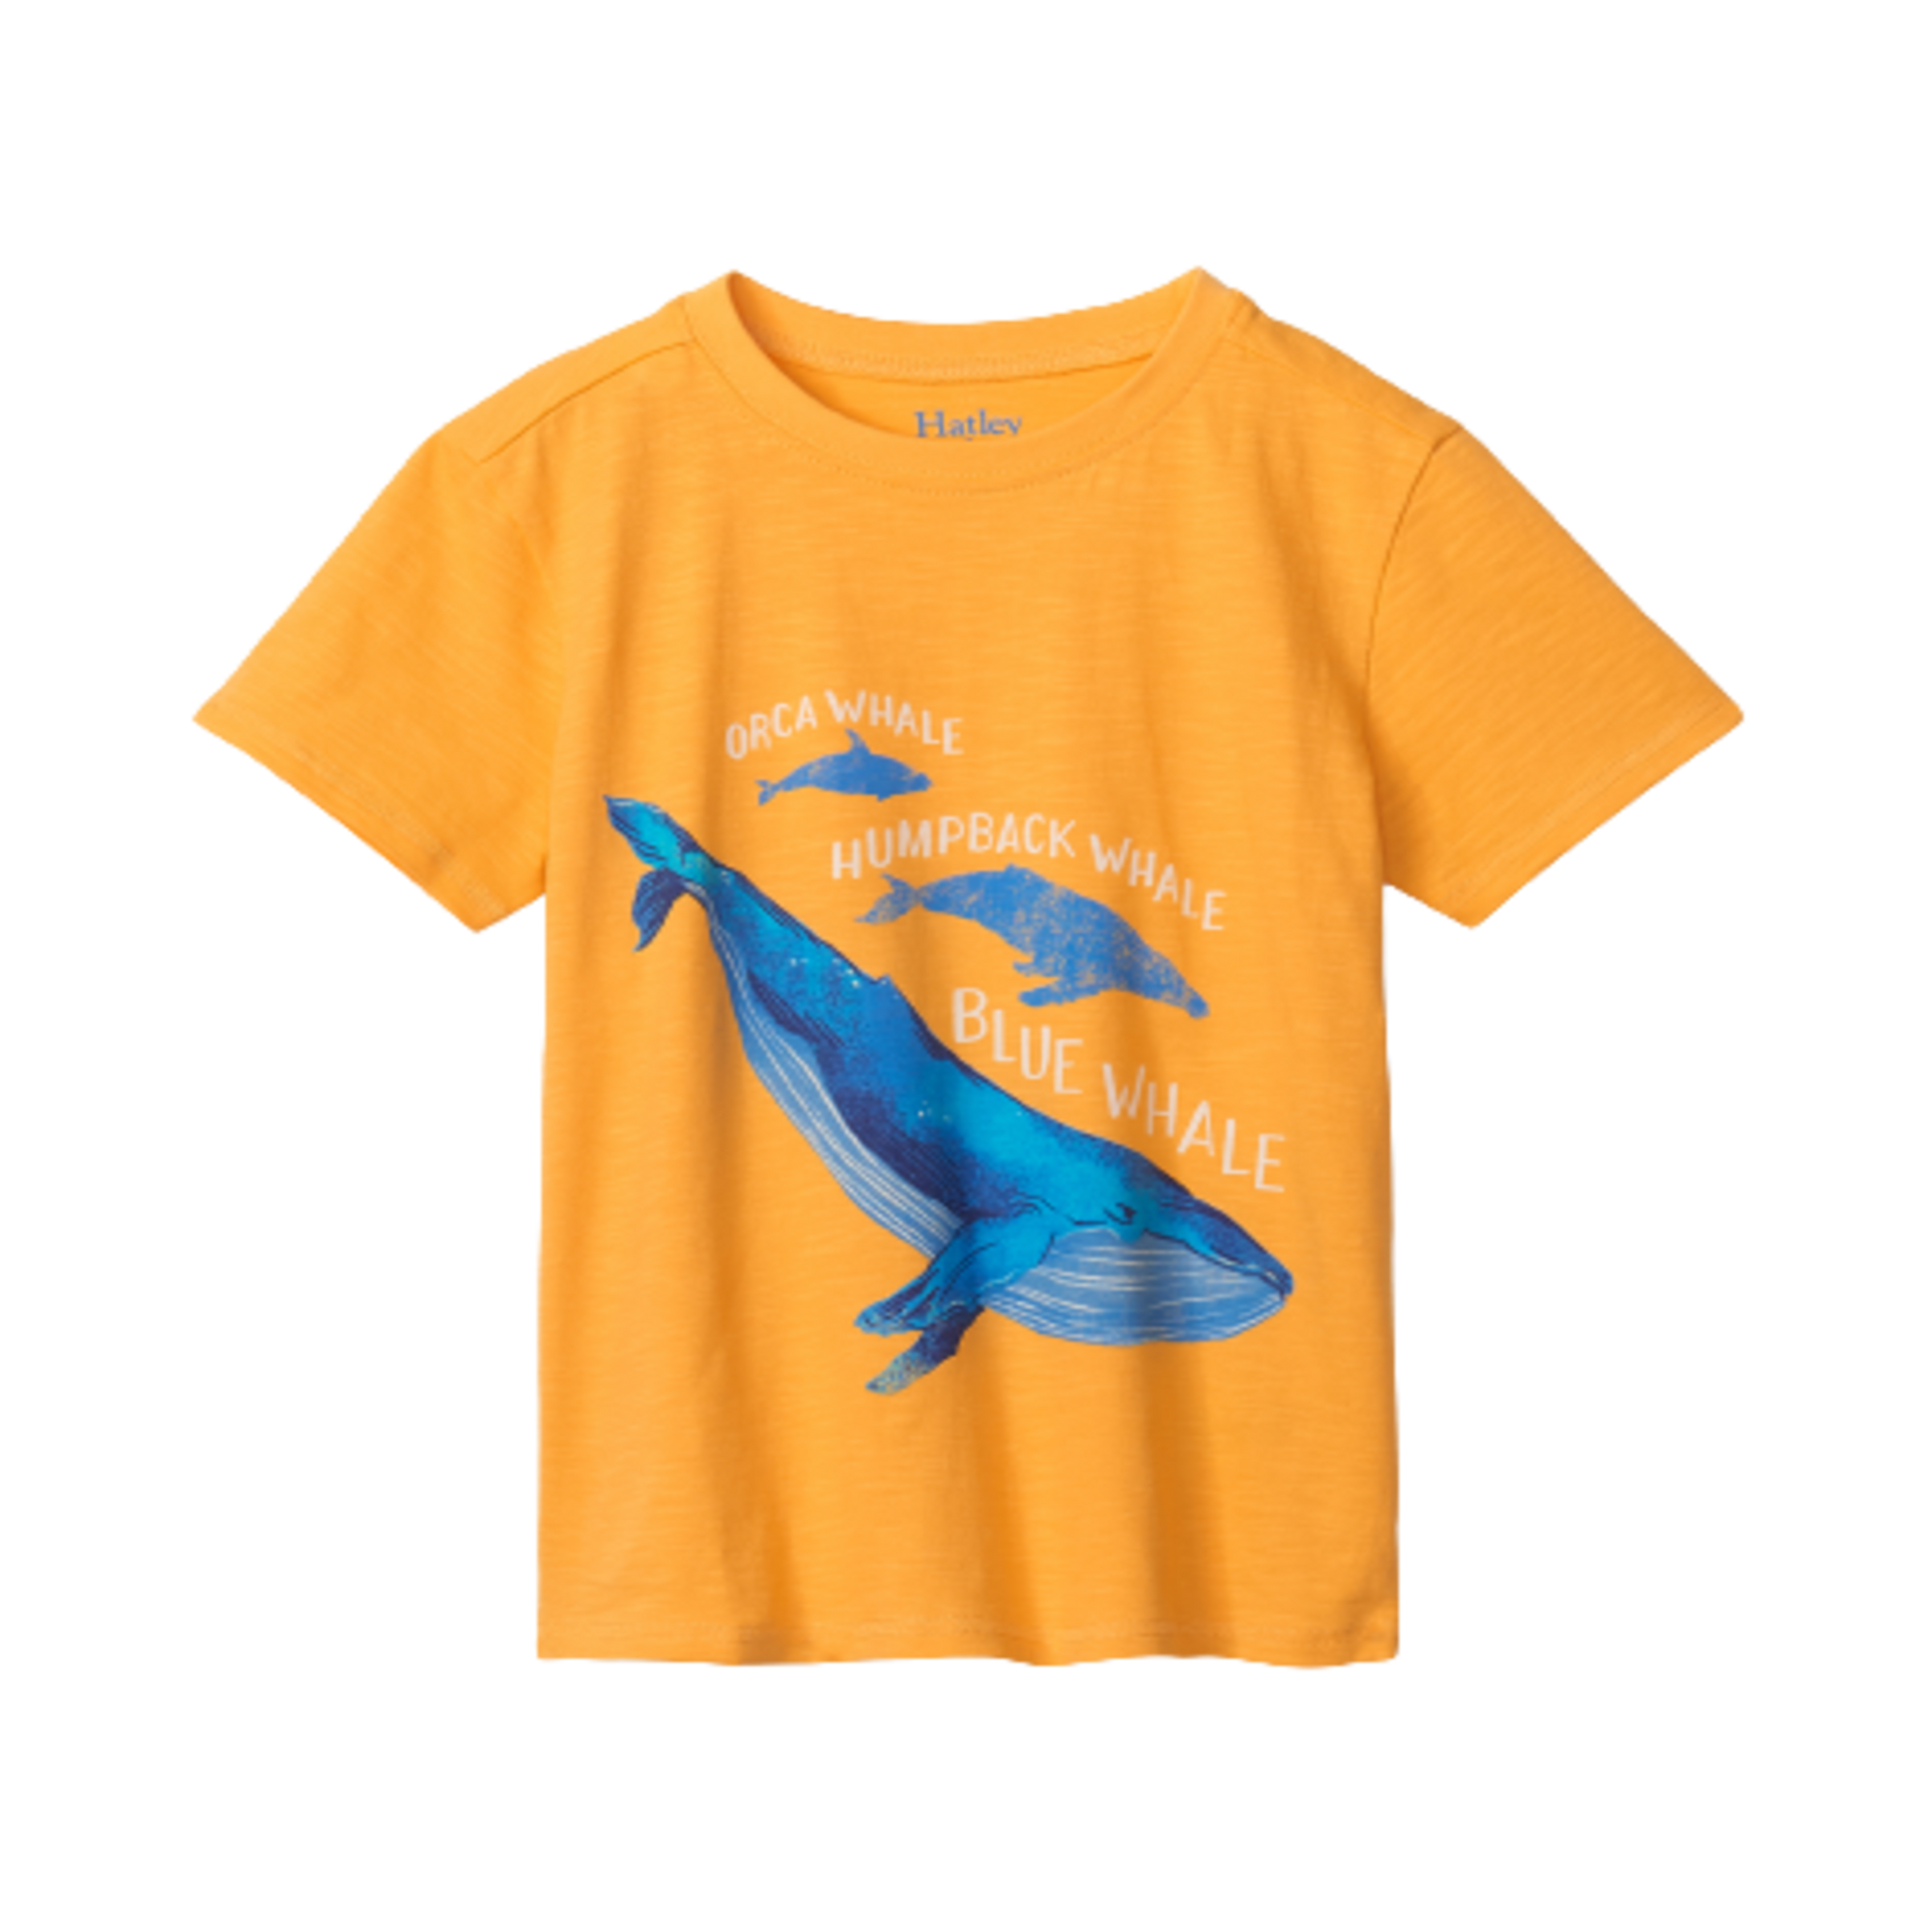 Hatley These Three Whales Graphic Tee - Banana